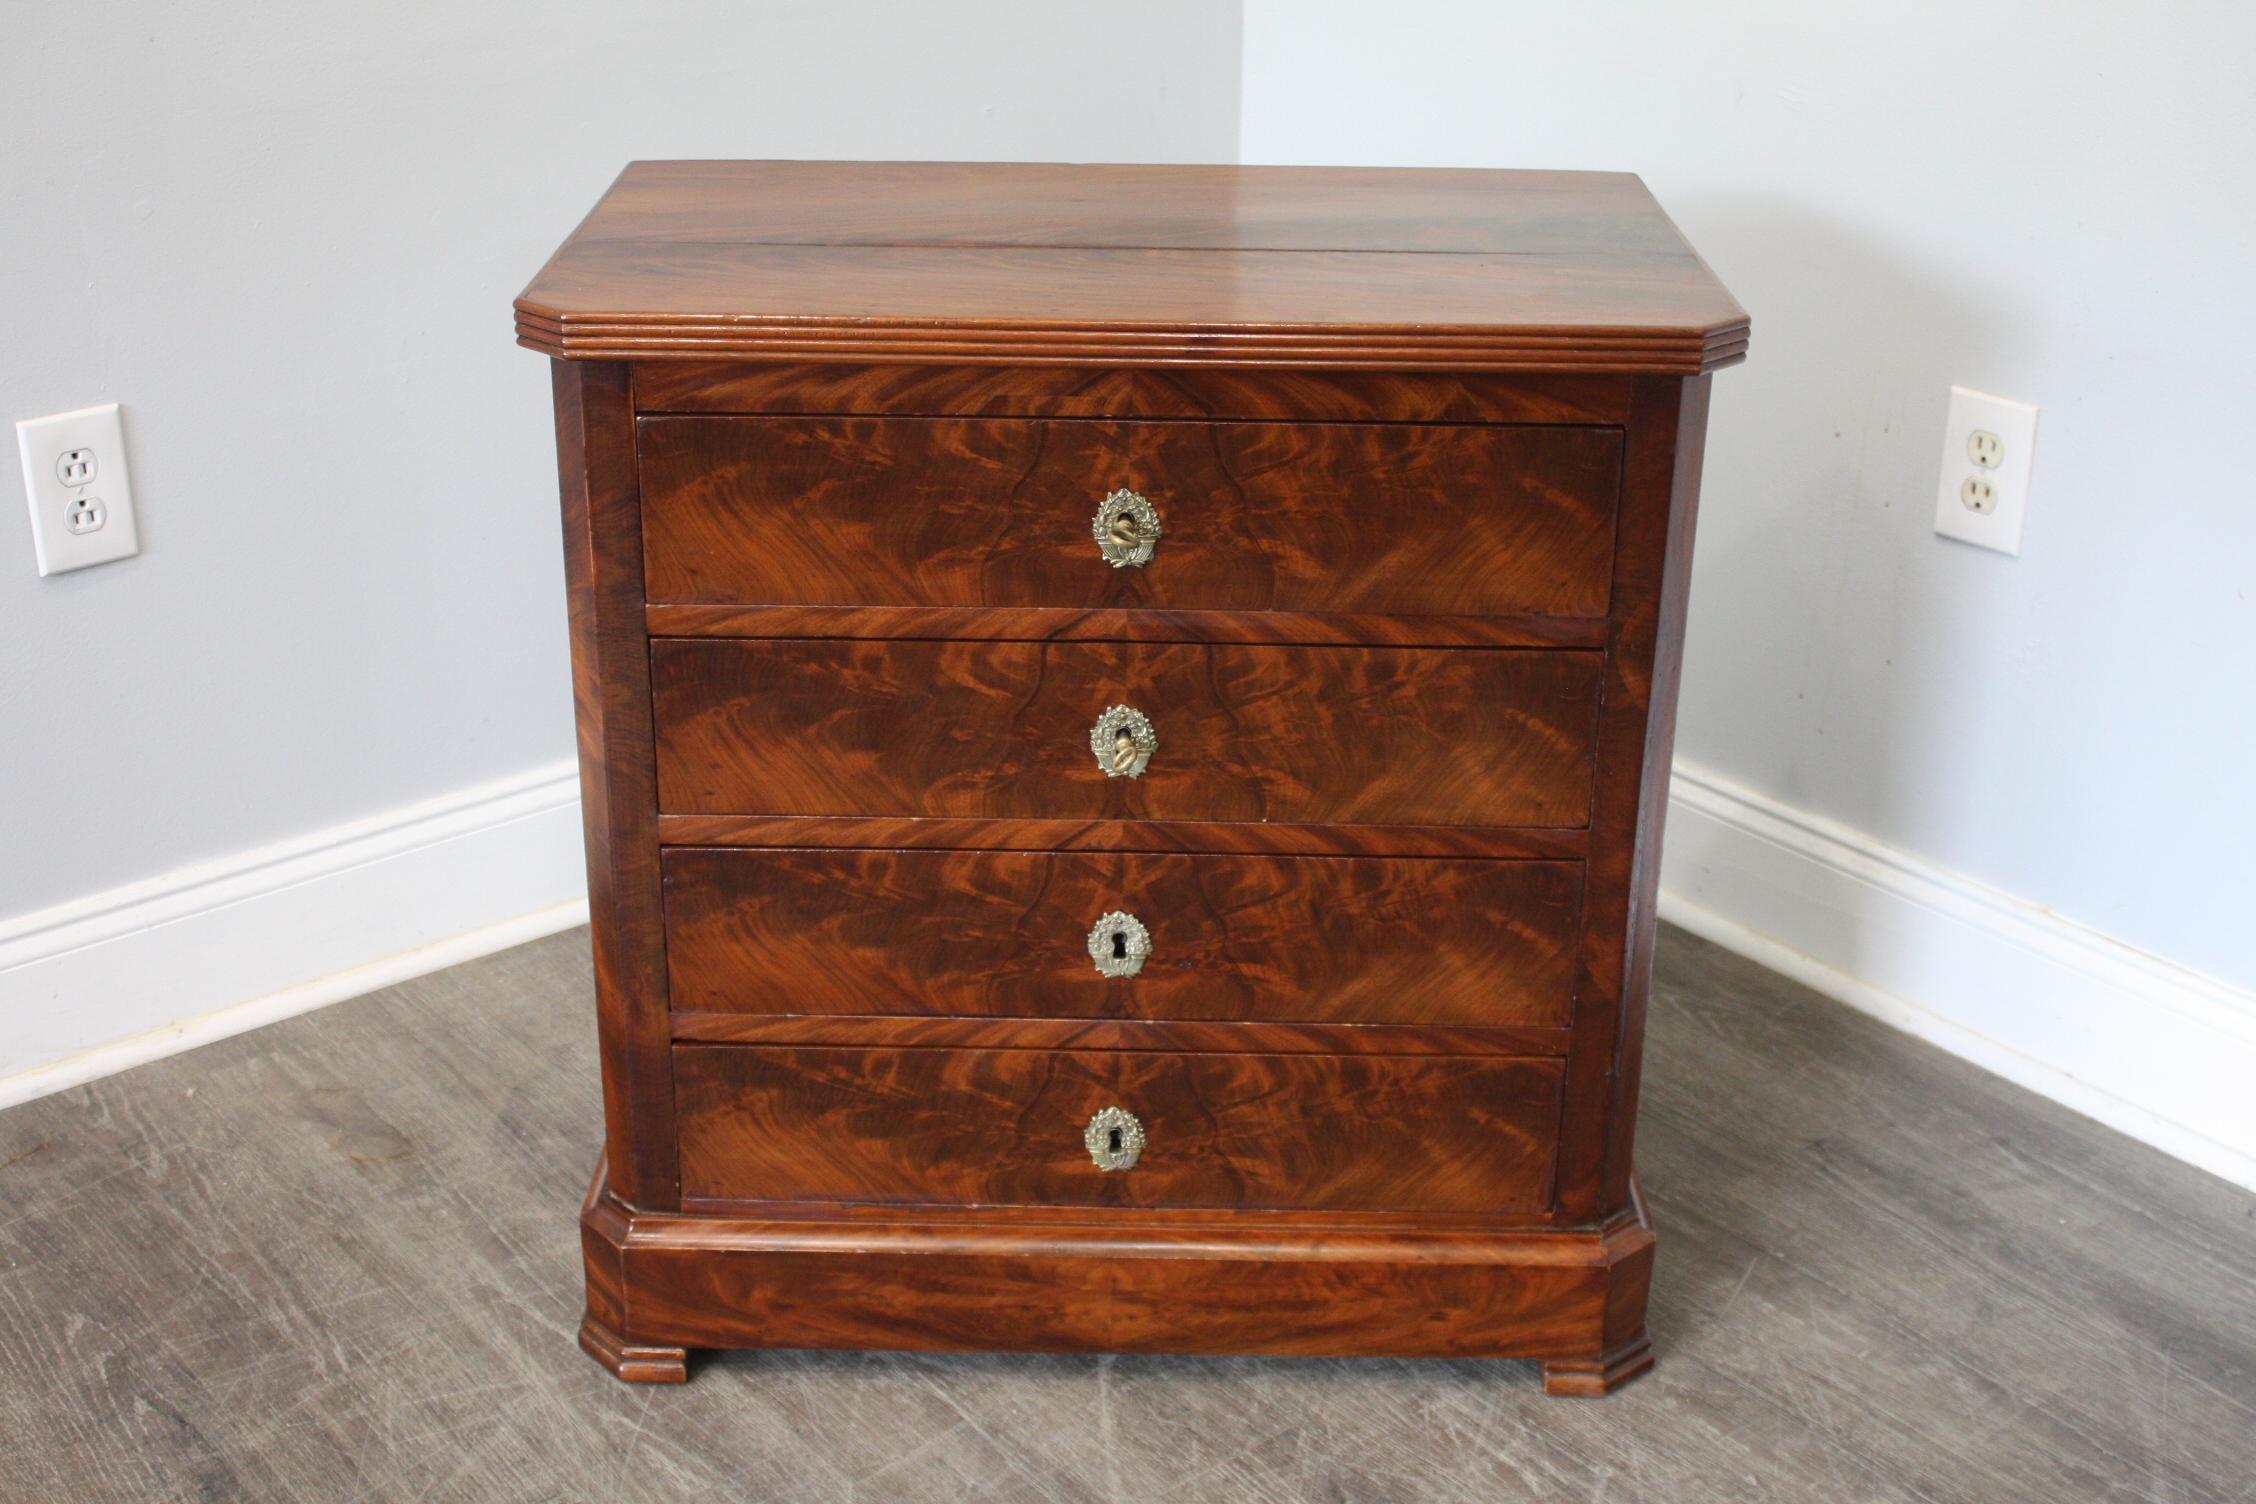 This Commode is made of marquetry of flamed mahogany. It has a small scale and is easy to place anywhere.